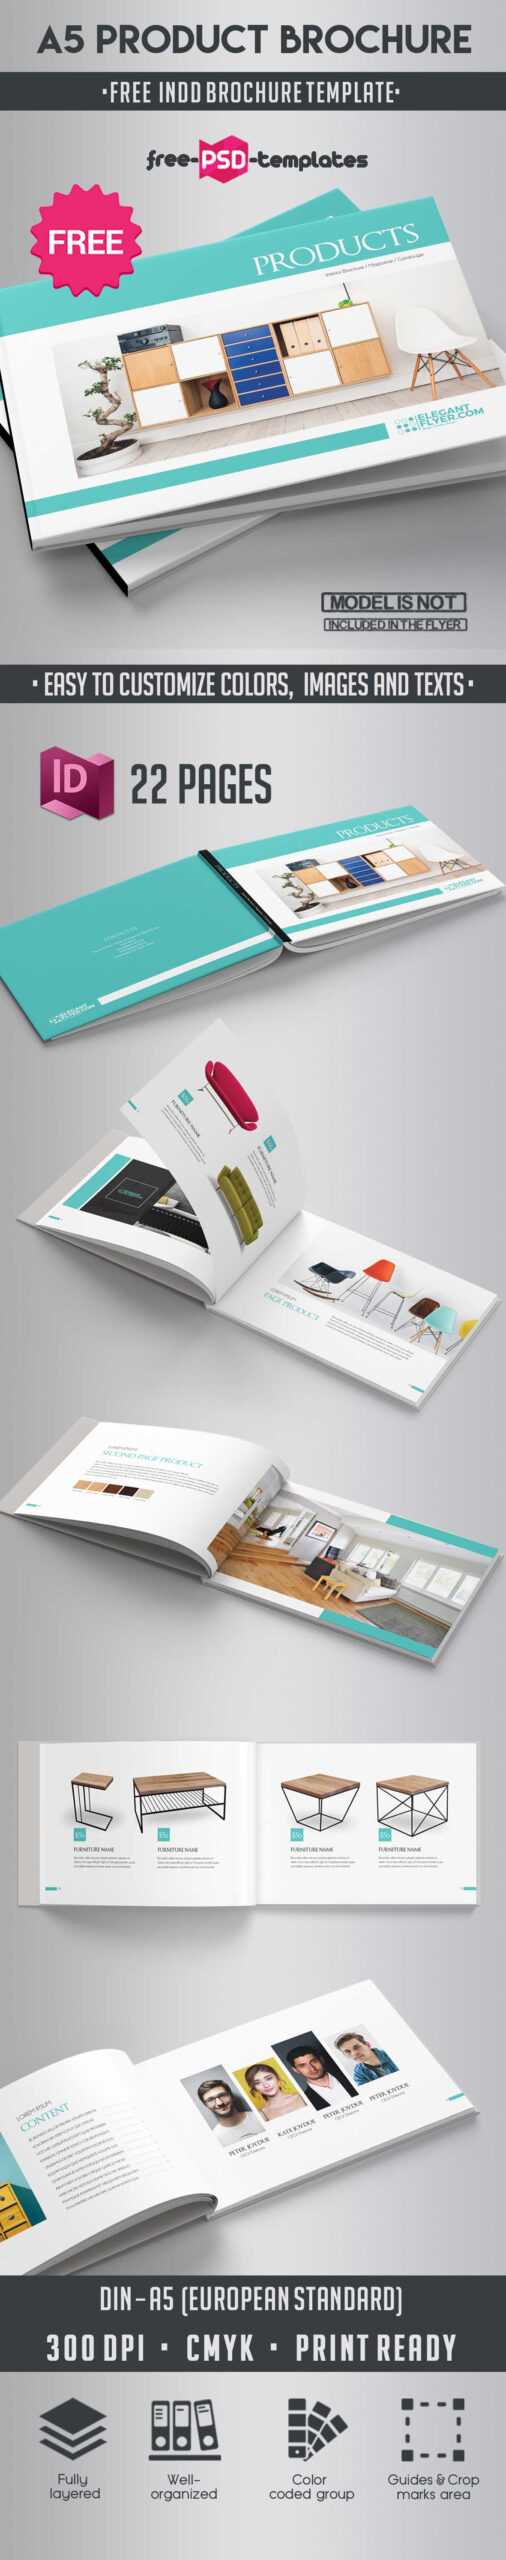 Free A5 Product Catalog Brochure Indd Template | Free Psd Intended For Product Brochure Template Free